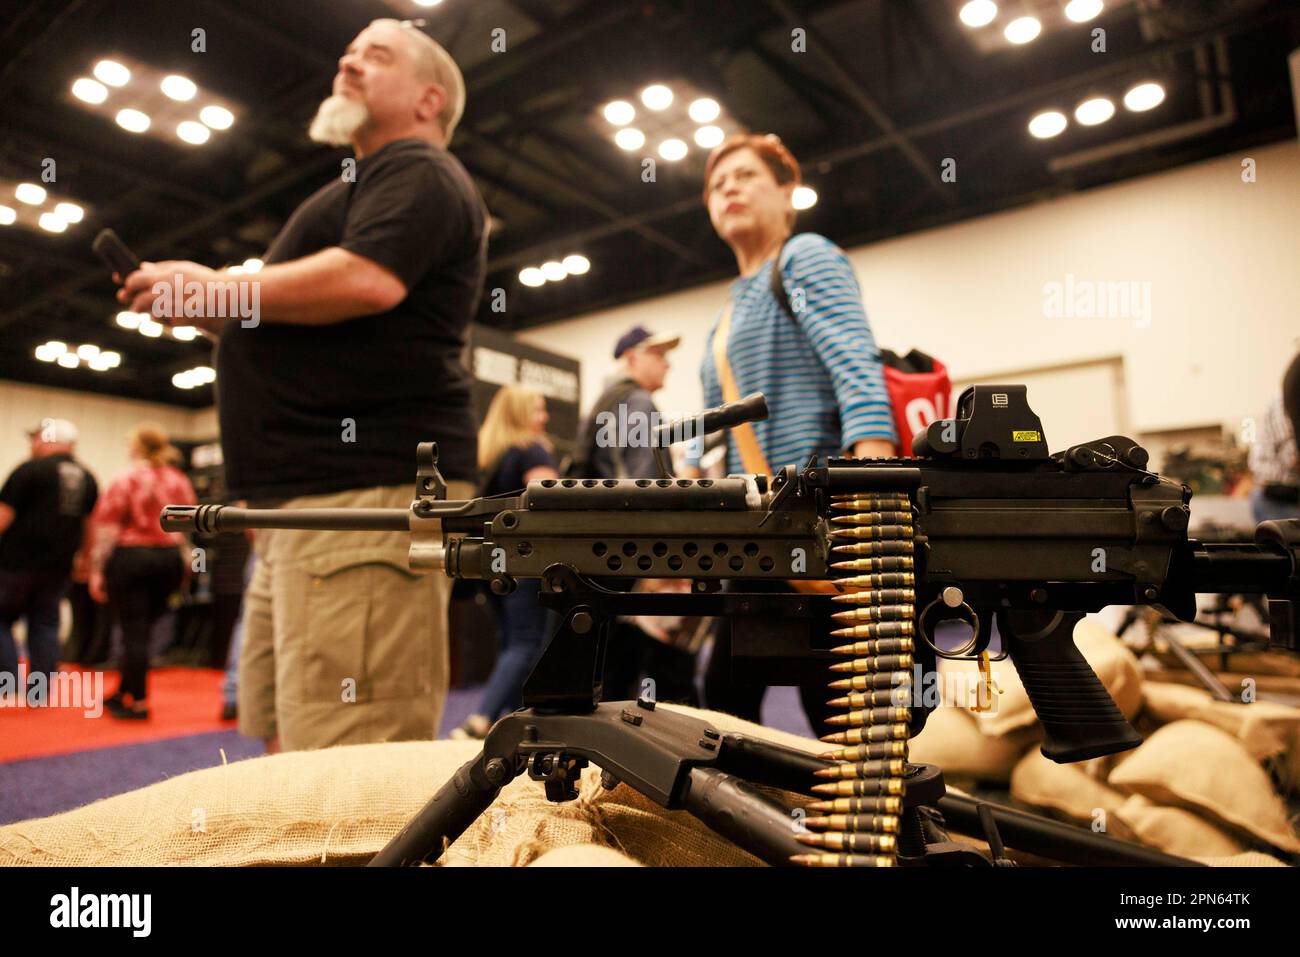 INDIANAPOLIS, INDIANA - APRIL 15: Guests look at a machine gun at the at the Ohio Ordnance Works Inc., booth during the National Rifle Association's Annual Meetings & Exhibits at the Indiana Convention Center on April 15, 2023 in Indianapolis, Indiana. The convention, which is expected to draw around 70,000 guests opened Friday. (Photo by Jeremy Hogan/The Bloomingtonian) Stock Photo